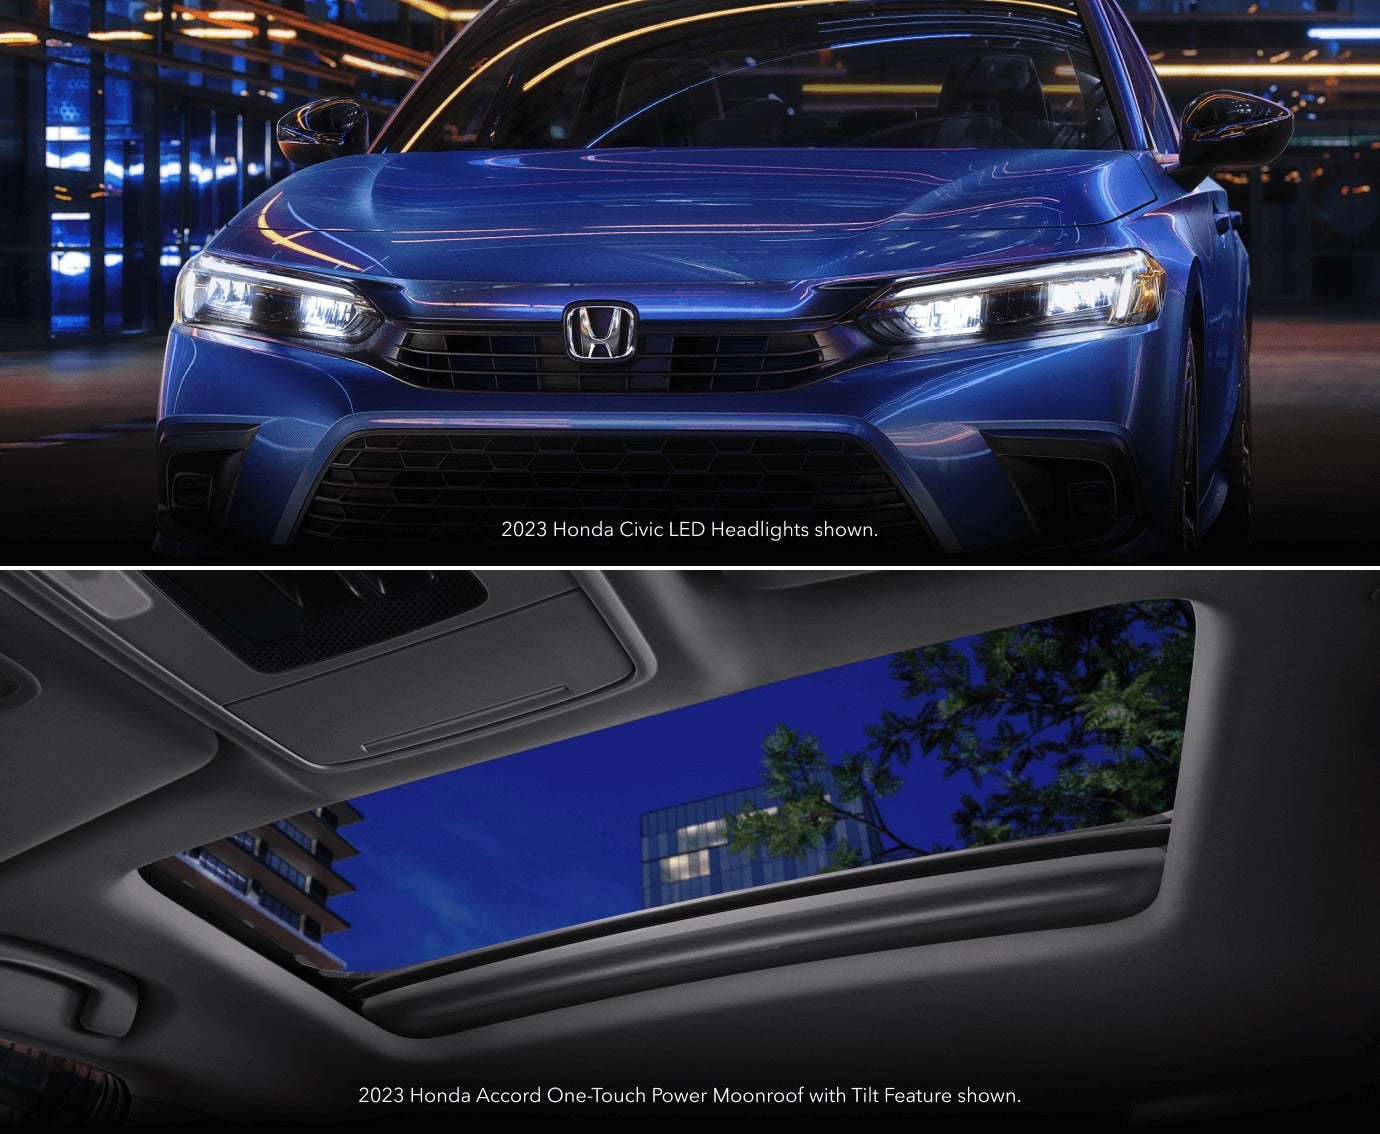 image of a 2023 Honda Civic headlights and the interior of a Honda Accord looking through the sunroof